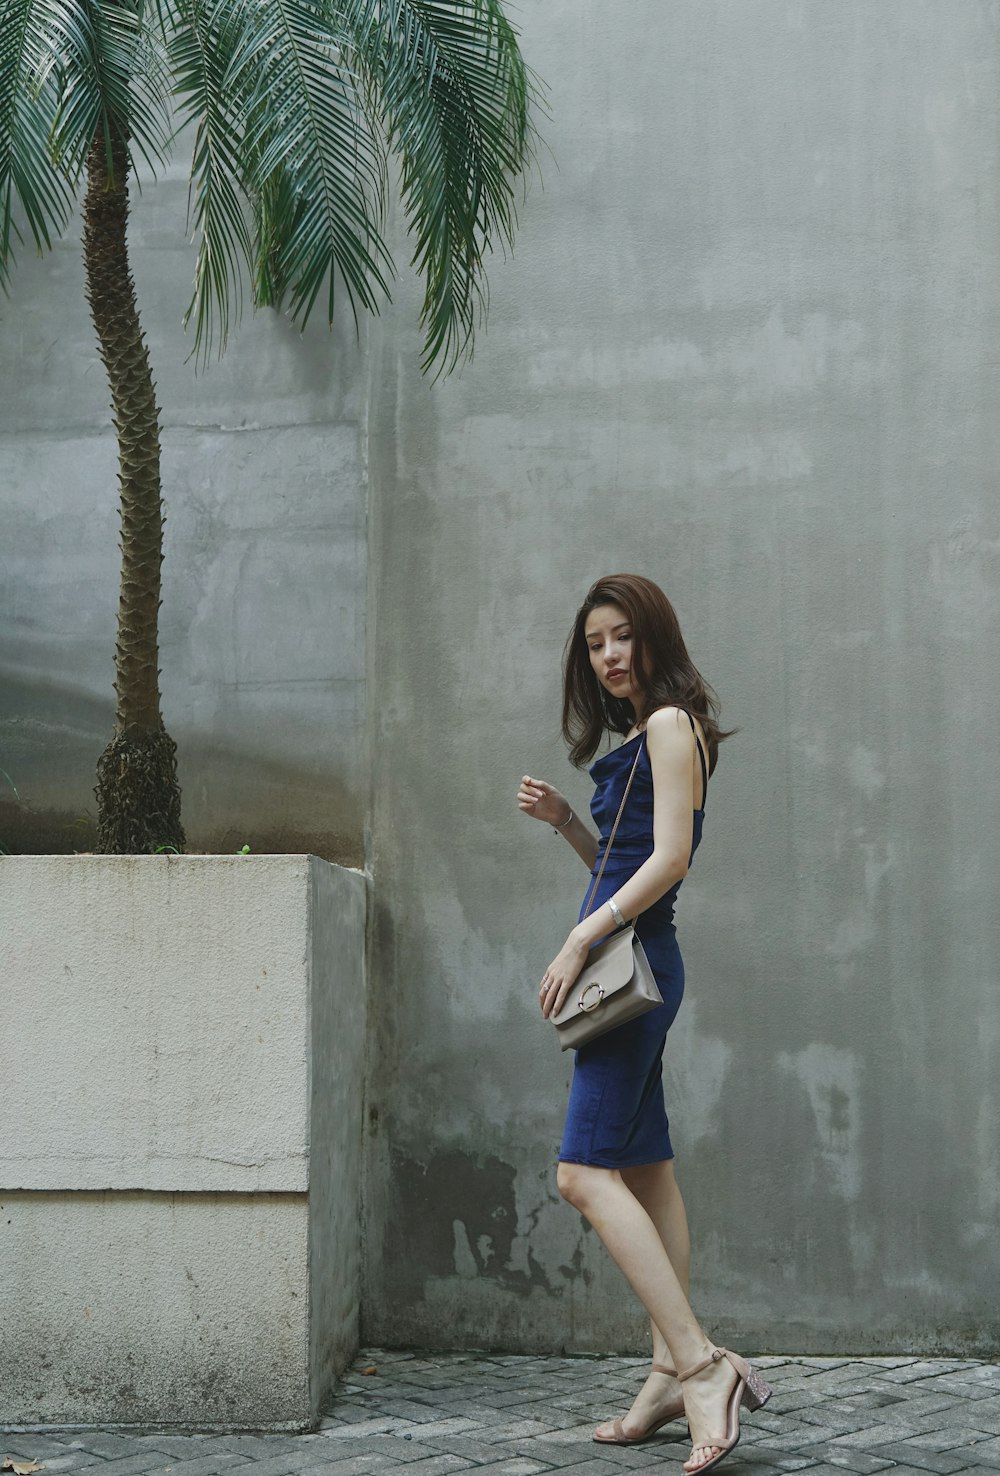 woman in blue sleeveless dress with brown leather sling bag standing near green palm tree during daytime